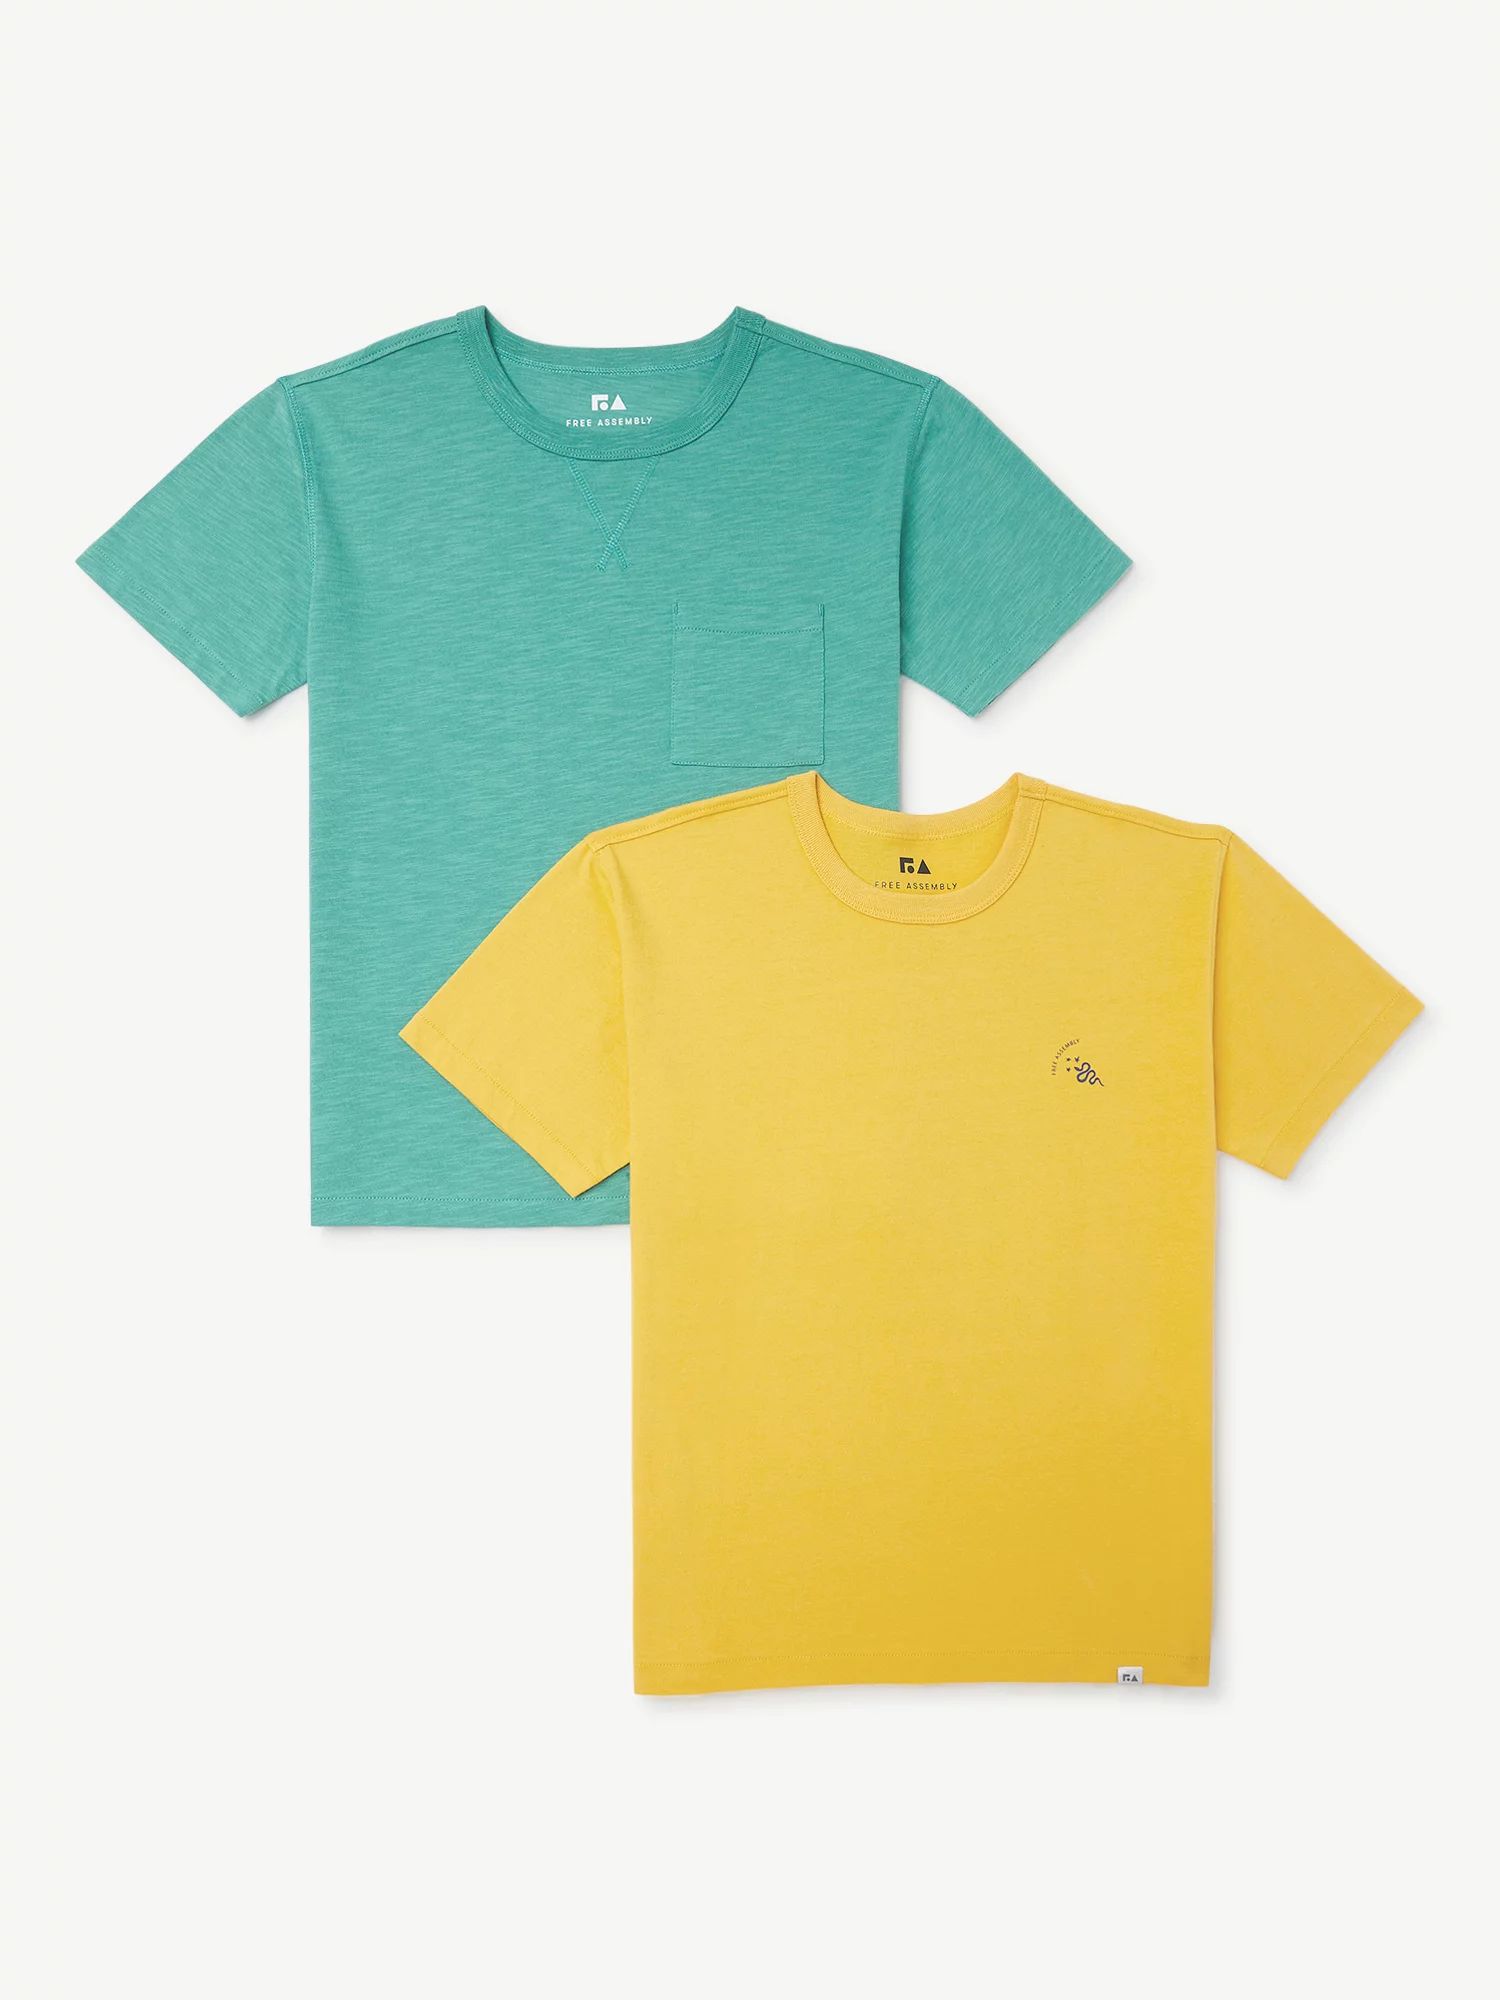 Free Assembly Boys Garment Washed Tee and Graphic Tee, 2-Pack, Sizes 4-18 - Walmart.com | Walmart (US)